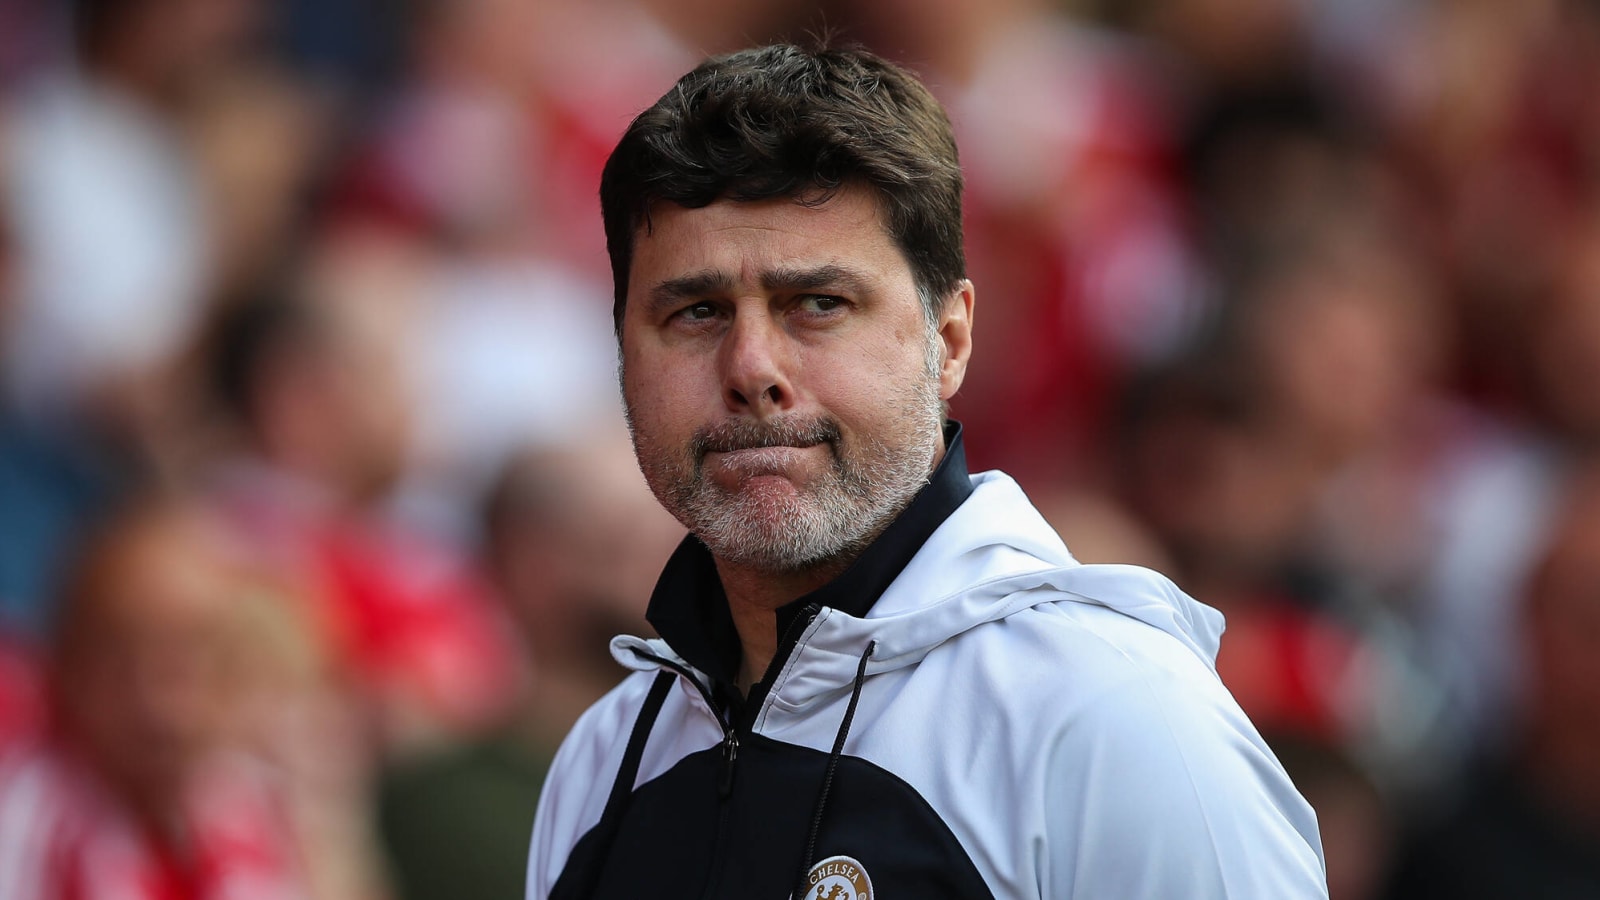 'I expect more' – Pochettino says he wants more from player who’s been superb lately